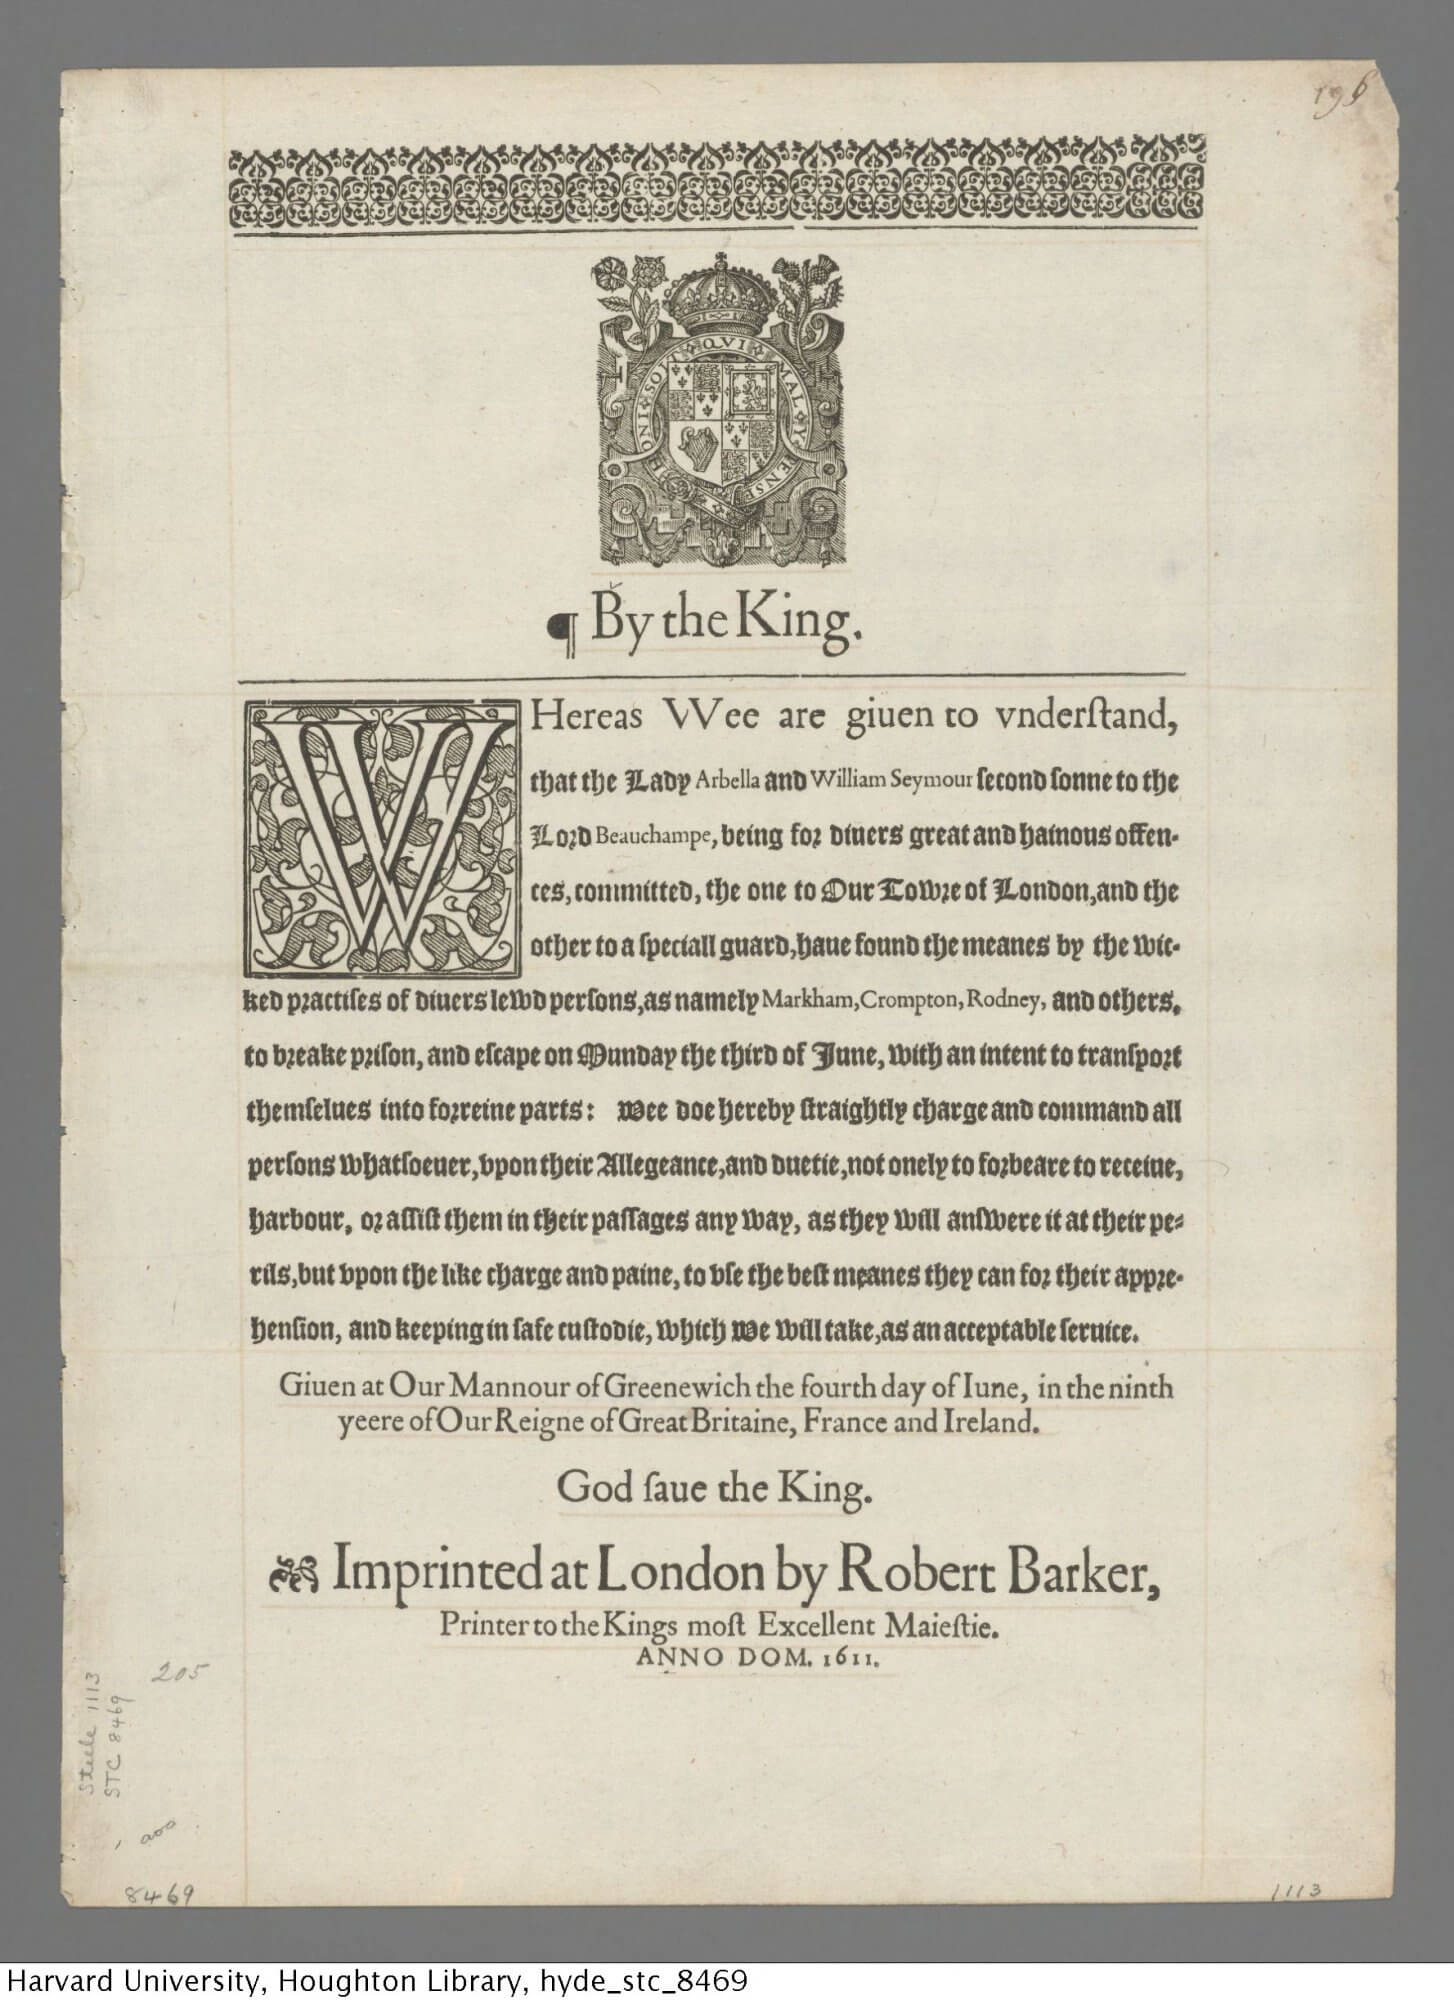 This broadside uses gothic type (or black letter as the English often called it) for the main text of its announcement, as is typical for official English documents, with roman type setting off the names of the escapees.